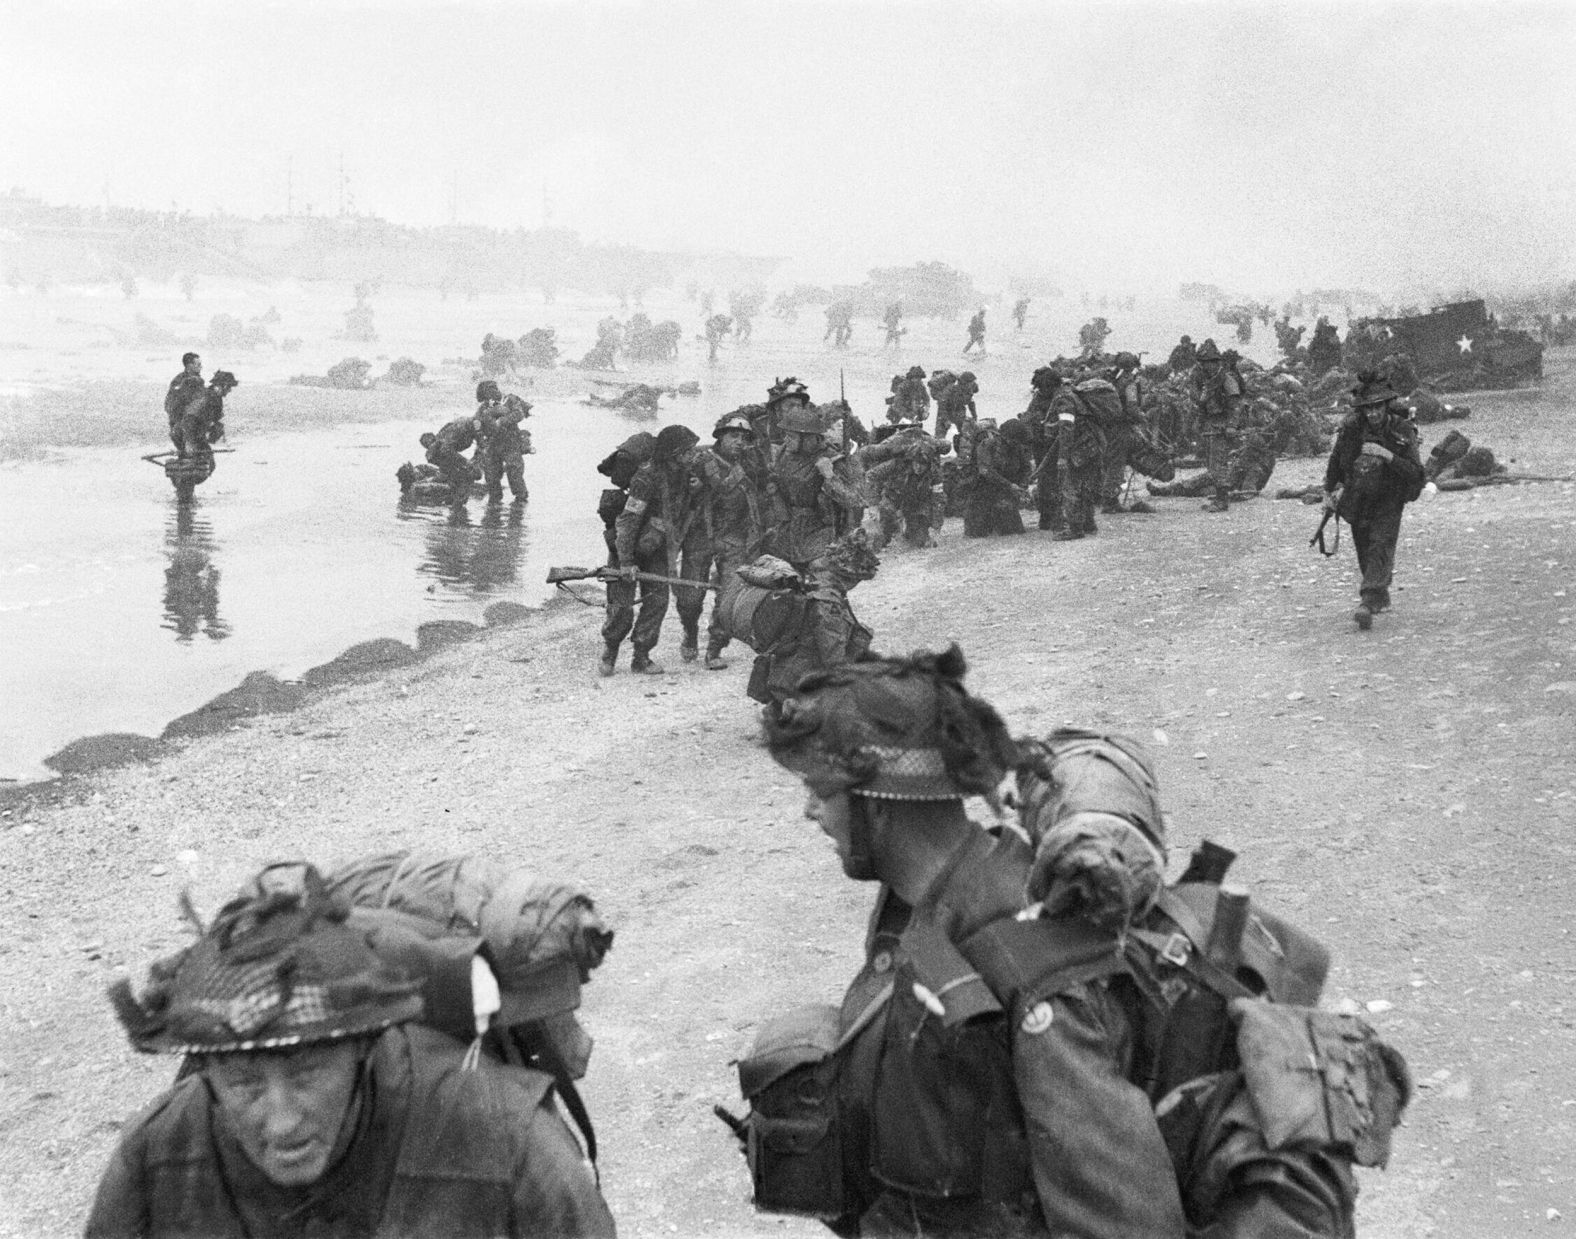 British troops reach the shore in the early morning. According to the Royal British Legion, the phrase D-Day was used fairly often before the Normandy landings. After them, however, the two became synonymous, and now D-Day is commonly understood to refer to the beginning of Operation Overlord.